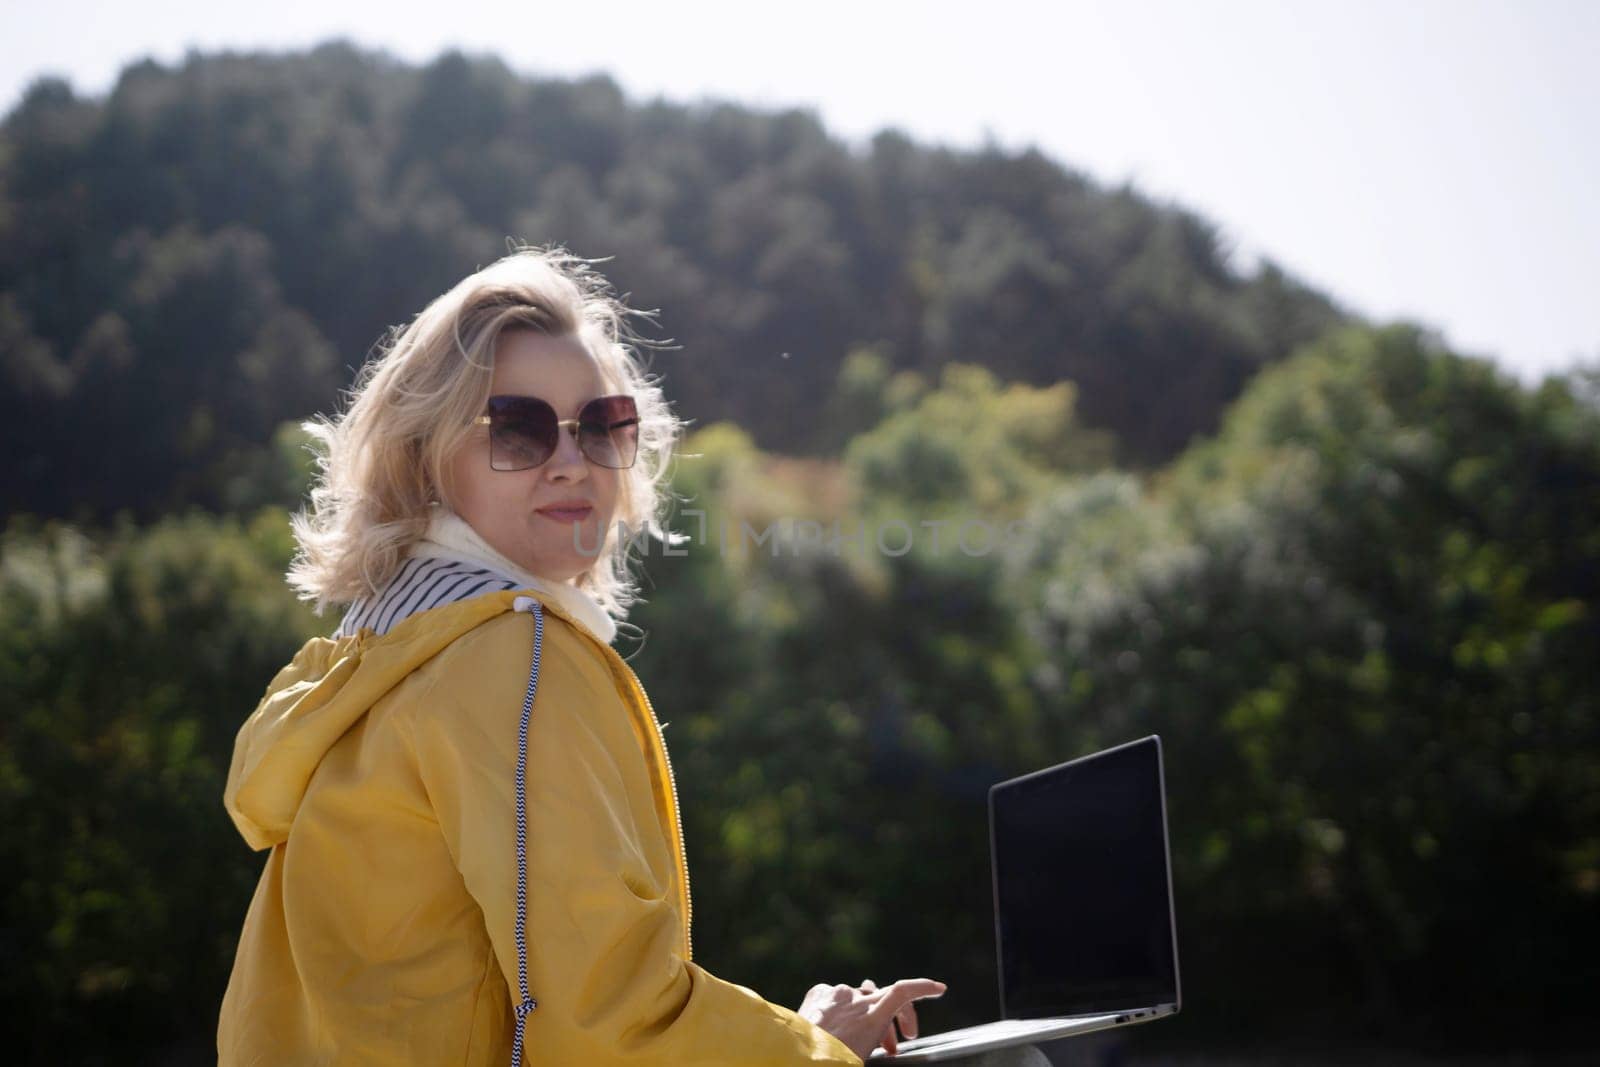 A woman in a yellow jacket is sitting on a bench with a laptop in front of her. She is smiling and she is enjoying her time outdoors